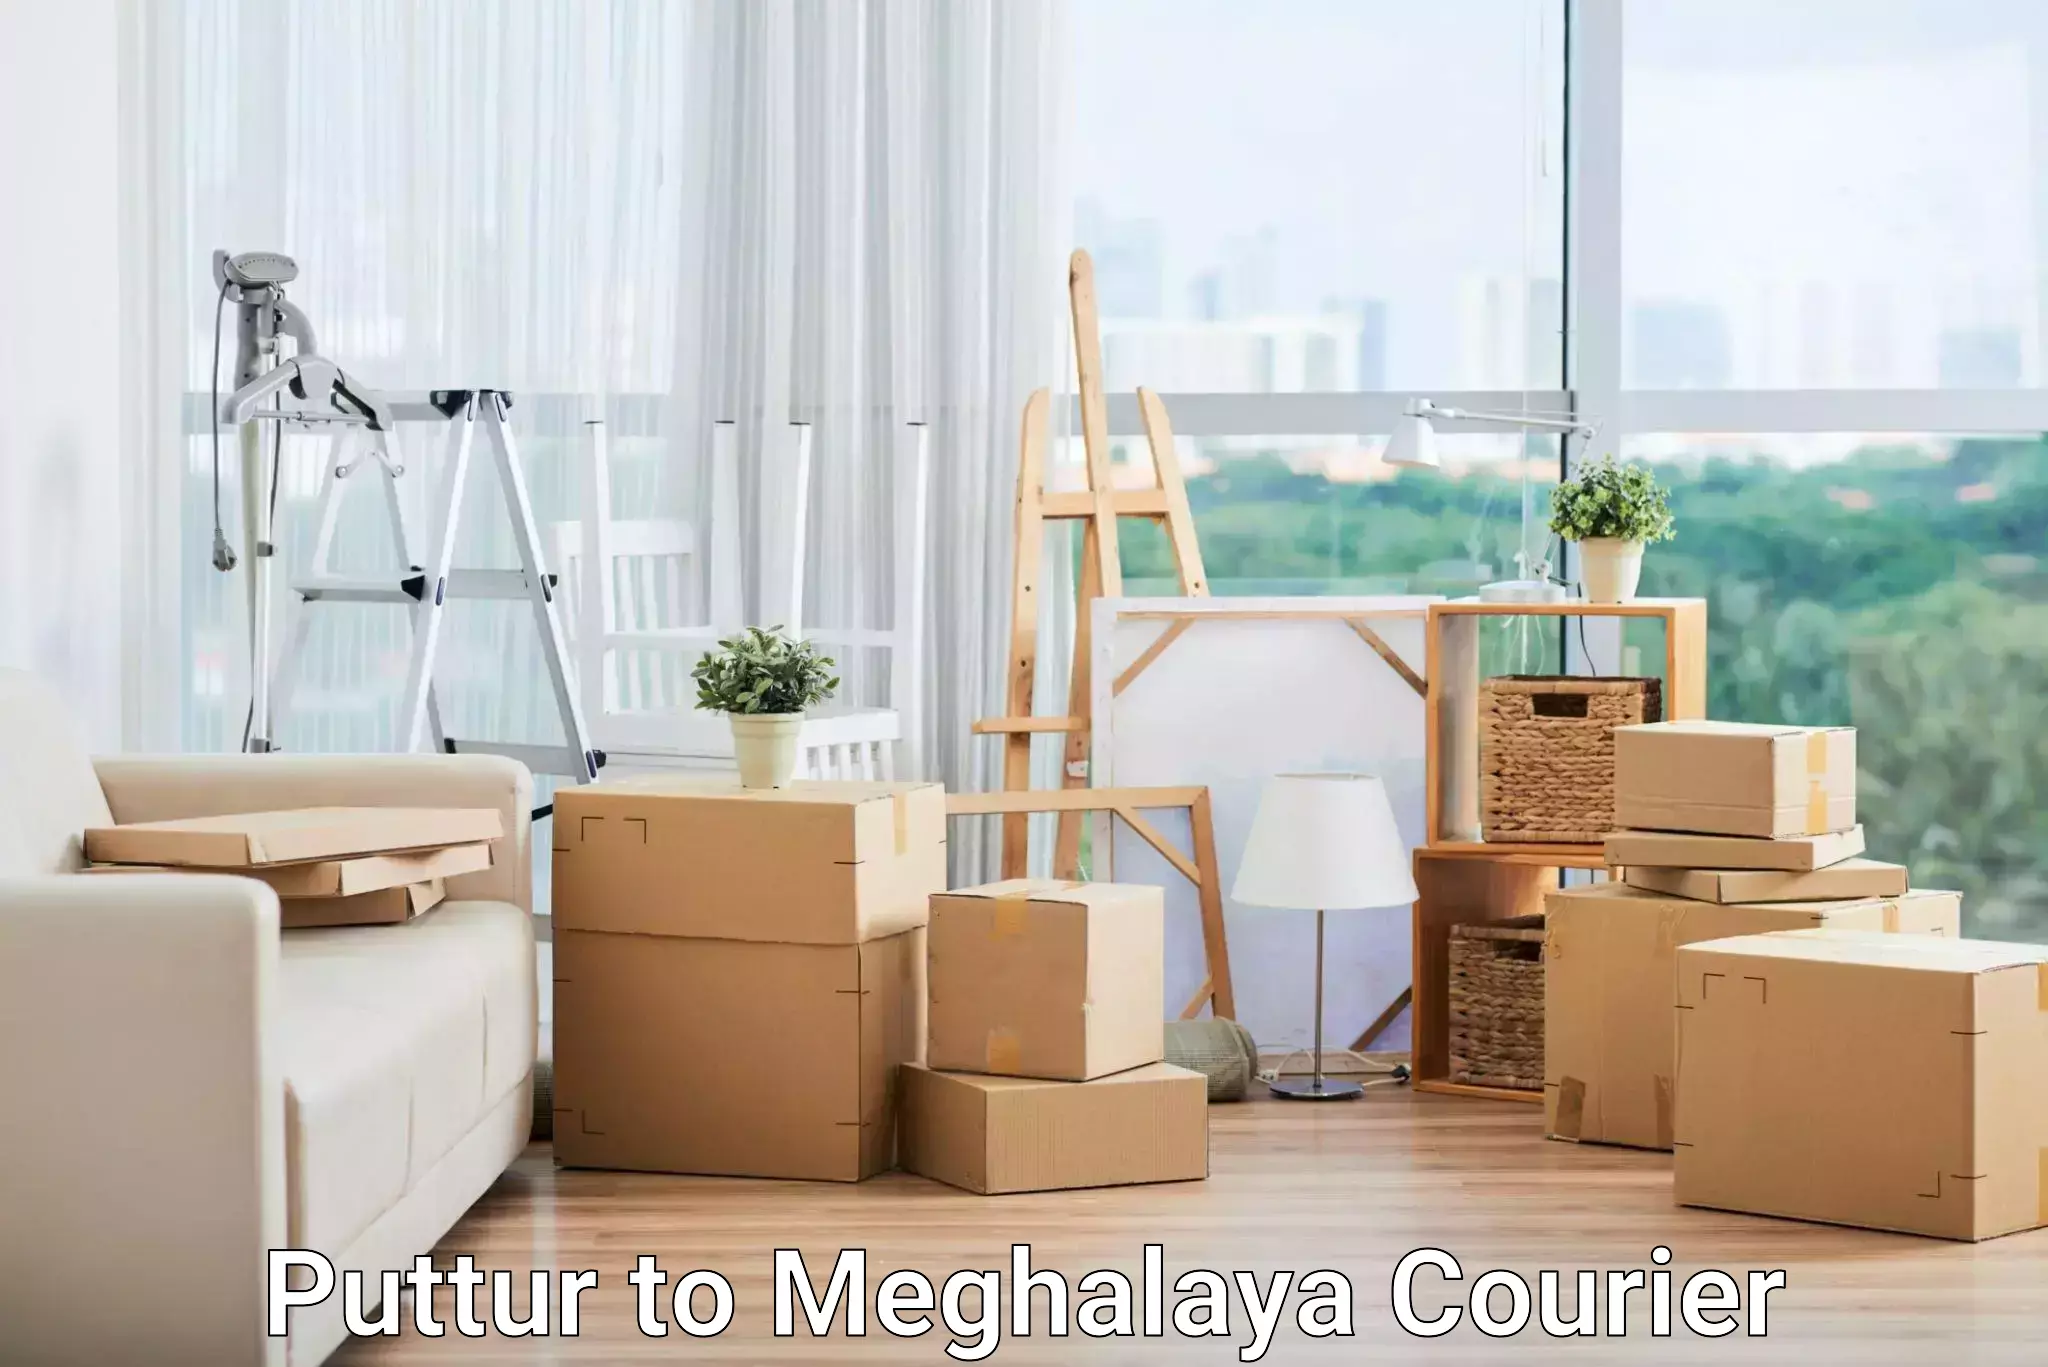 Quality courier partnerships Puttur to Meghalaya